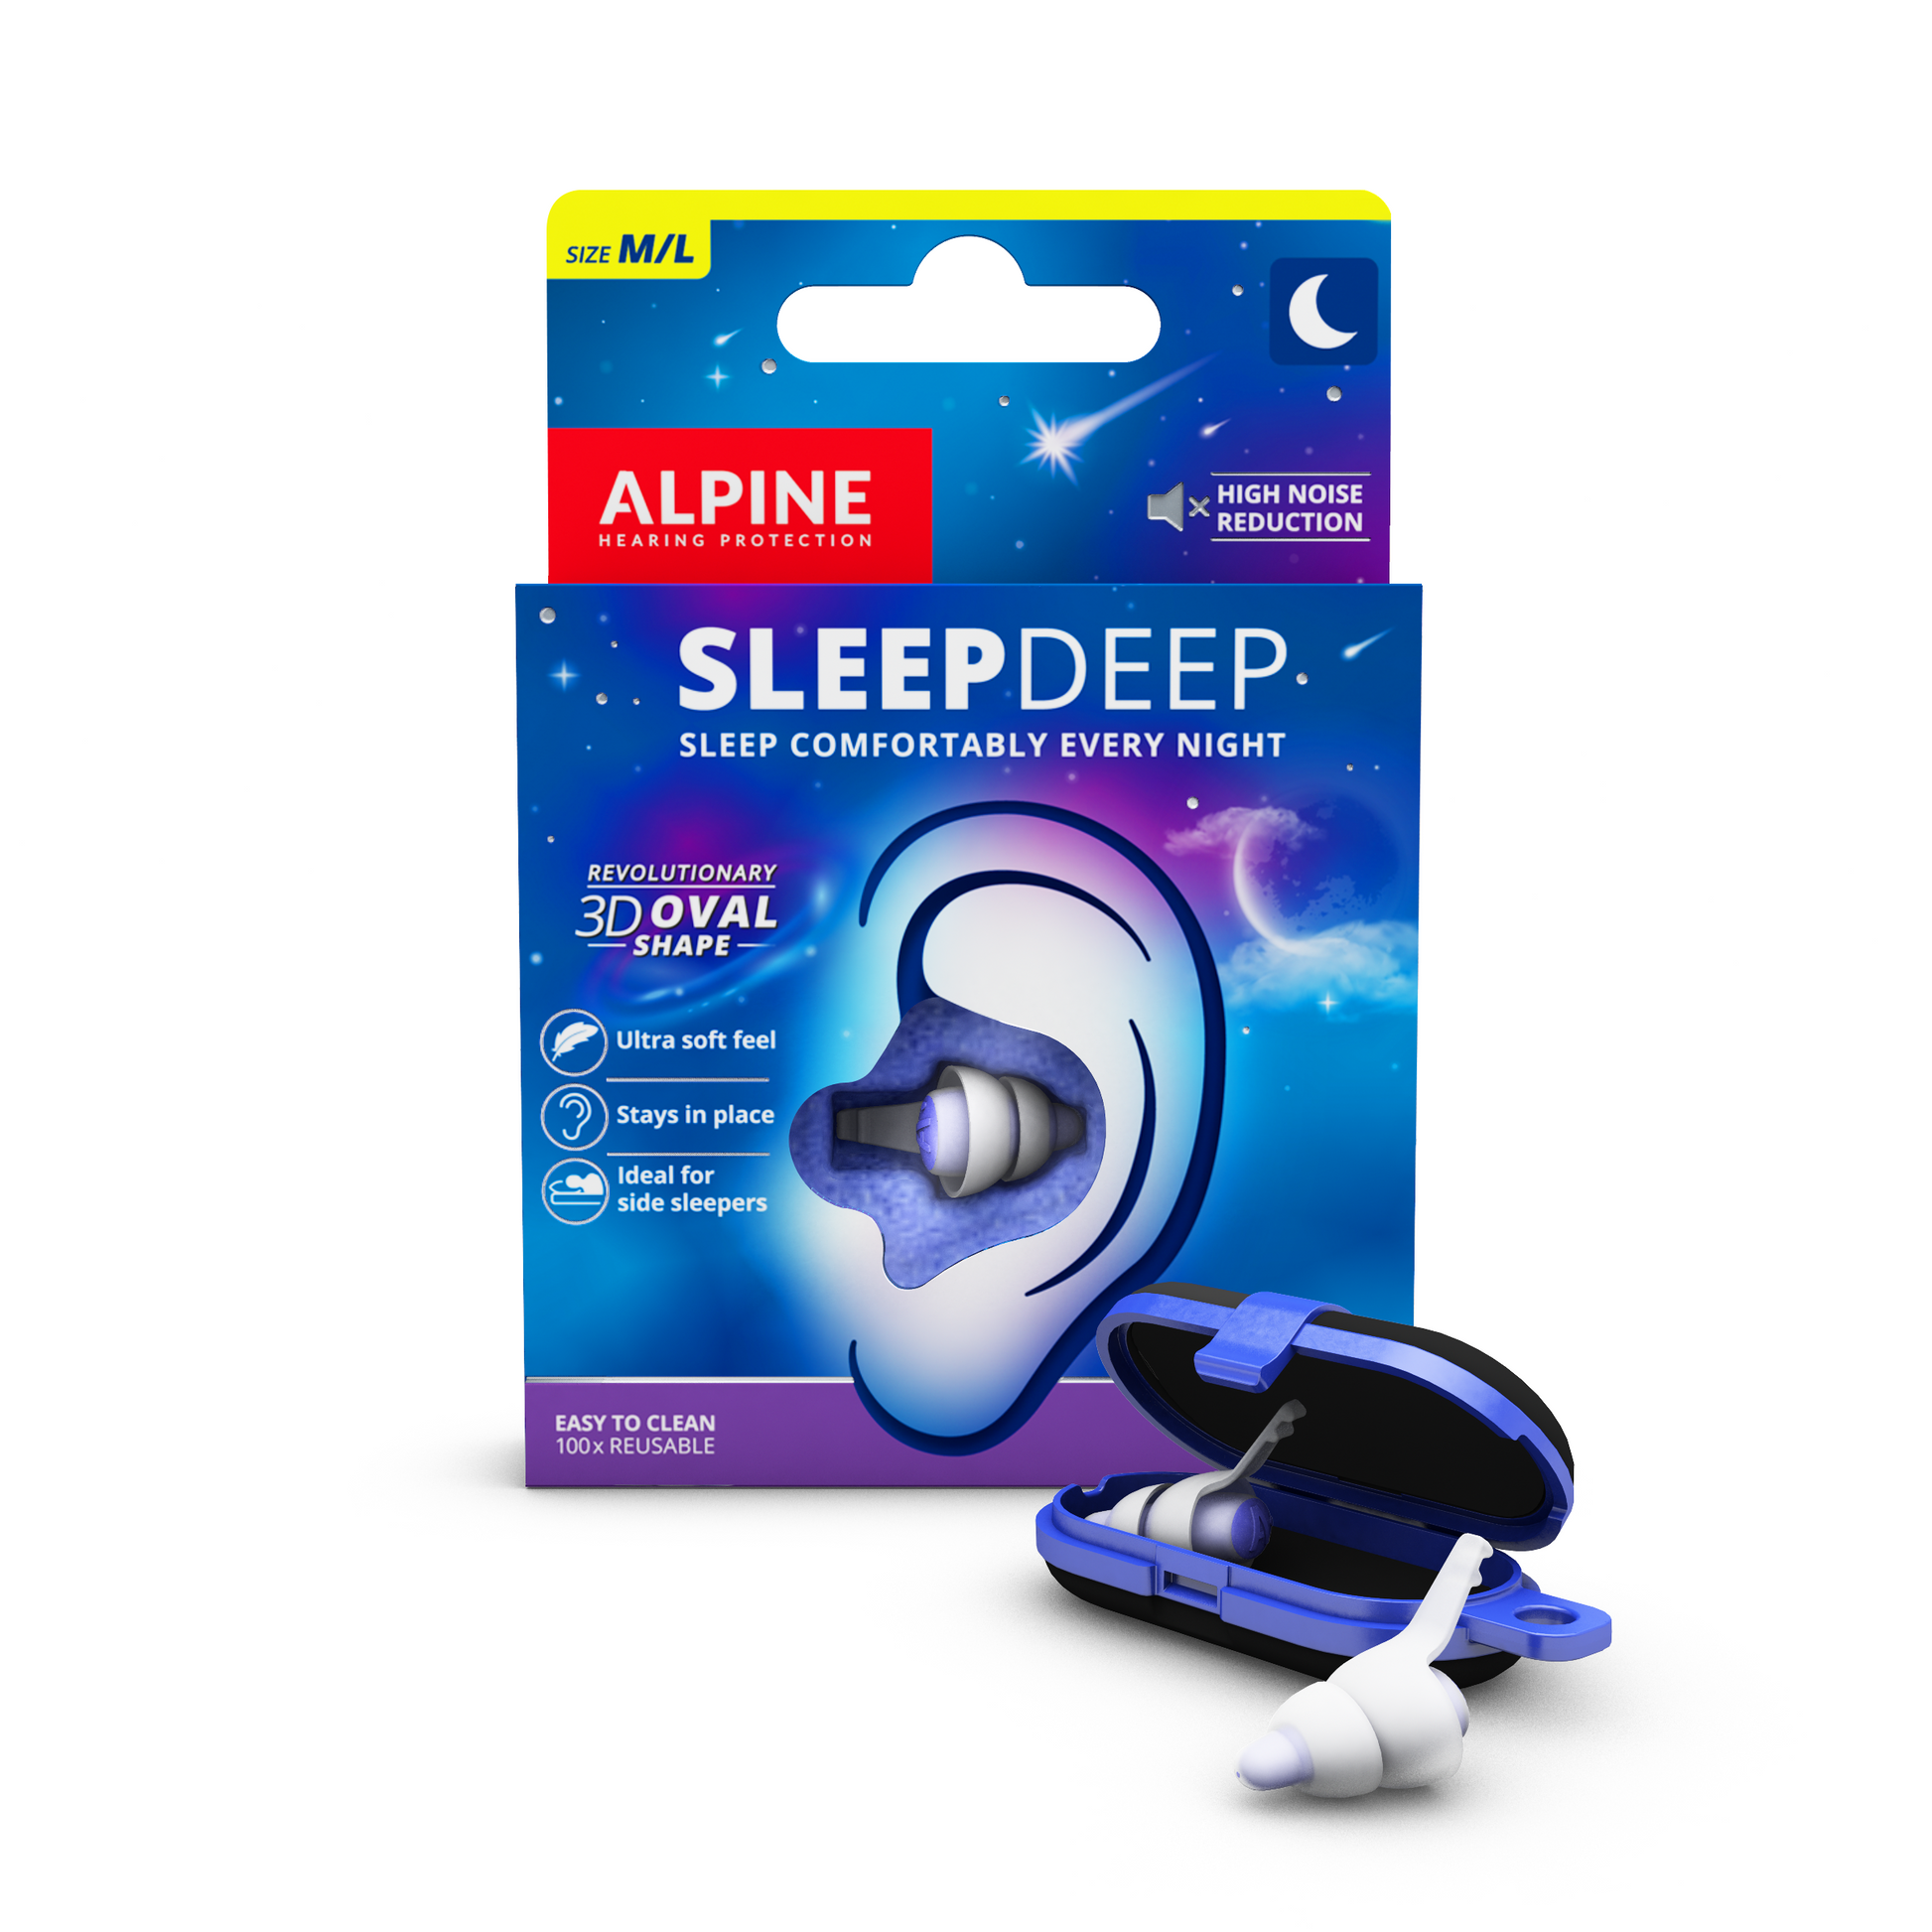 Best Sleep Awards 2022: The 25 Best Products for All Types of Sleepers